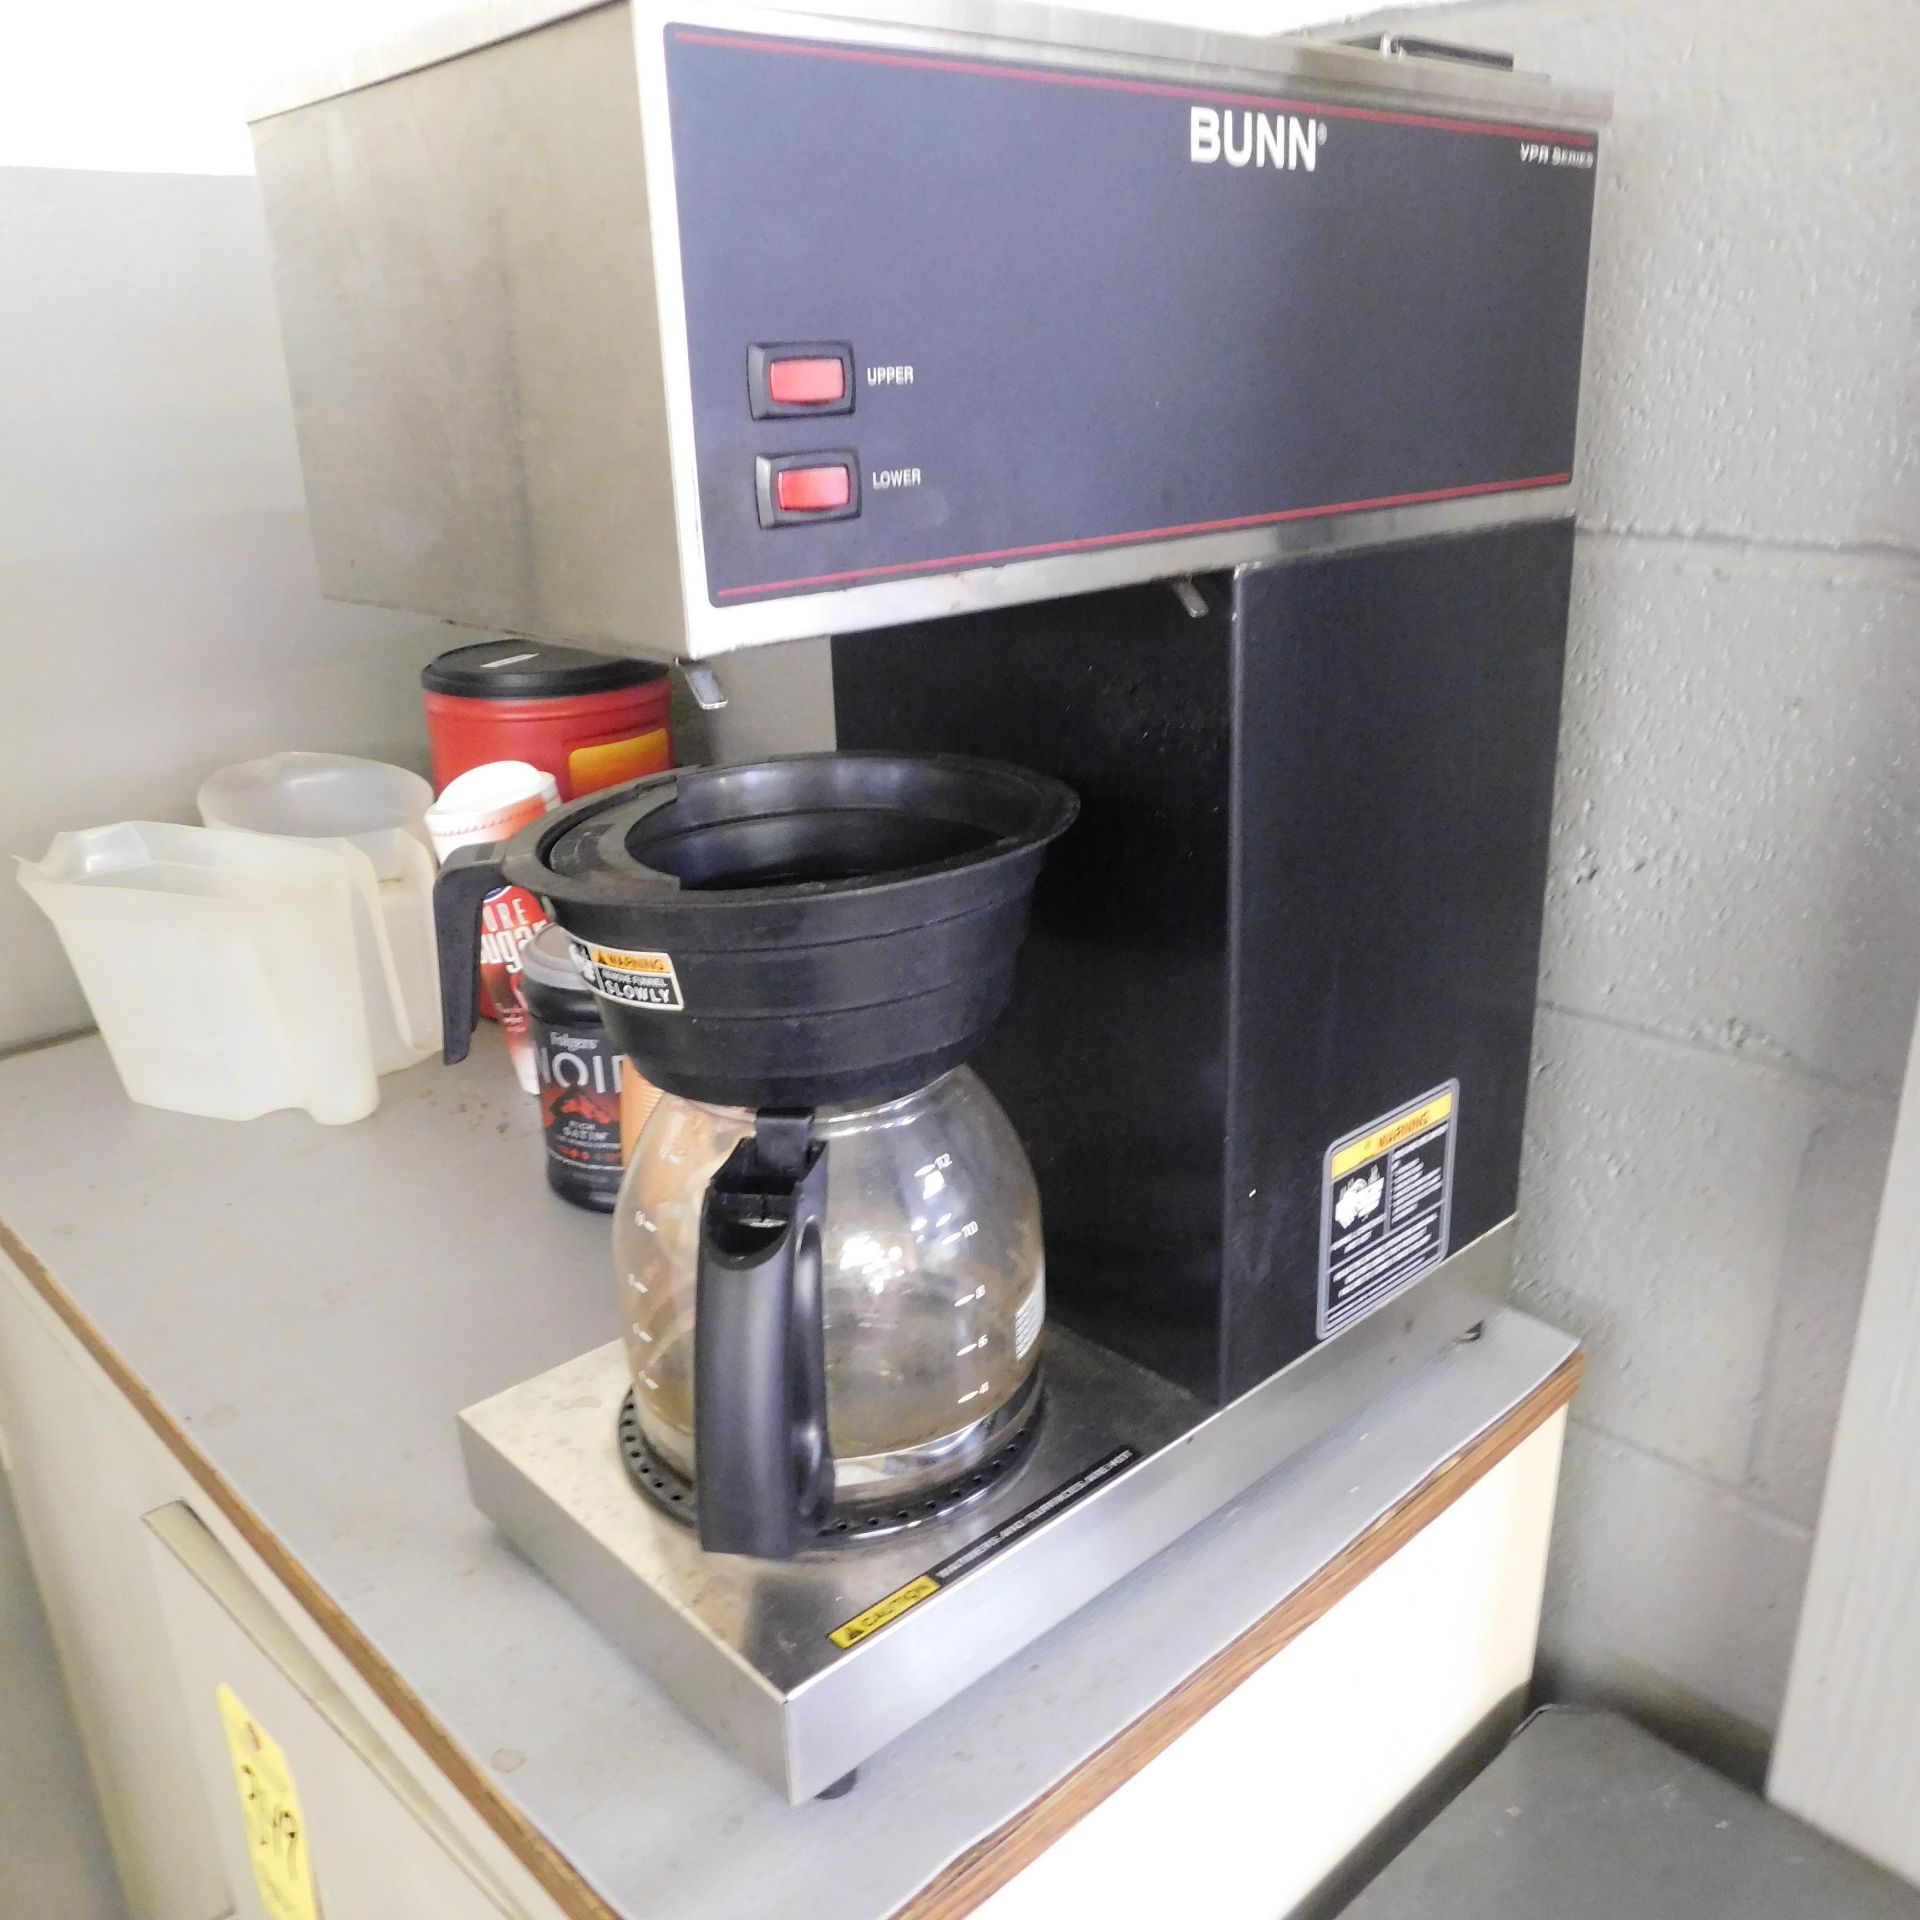 2-Door Small Storage Cabinet with Bunn Coffee Maker - Image 2 of 2